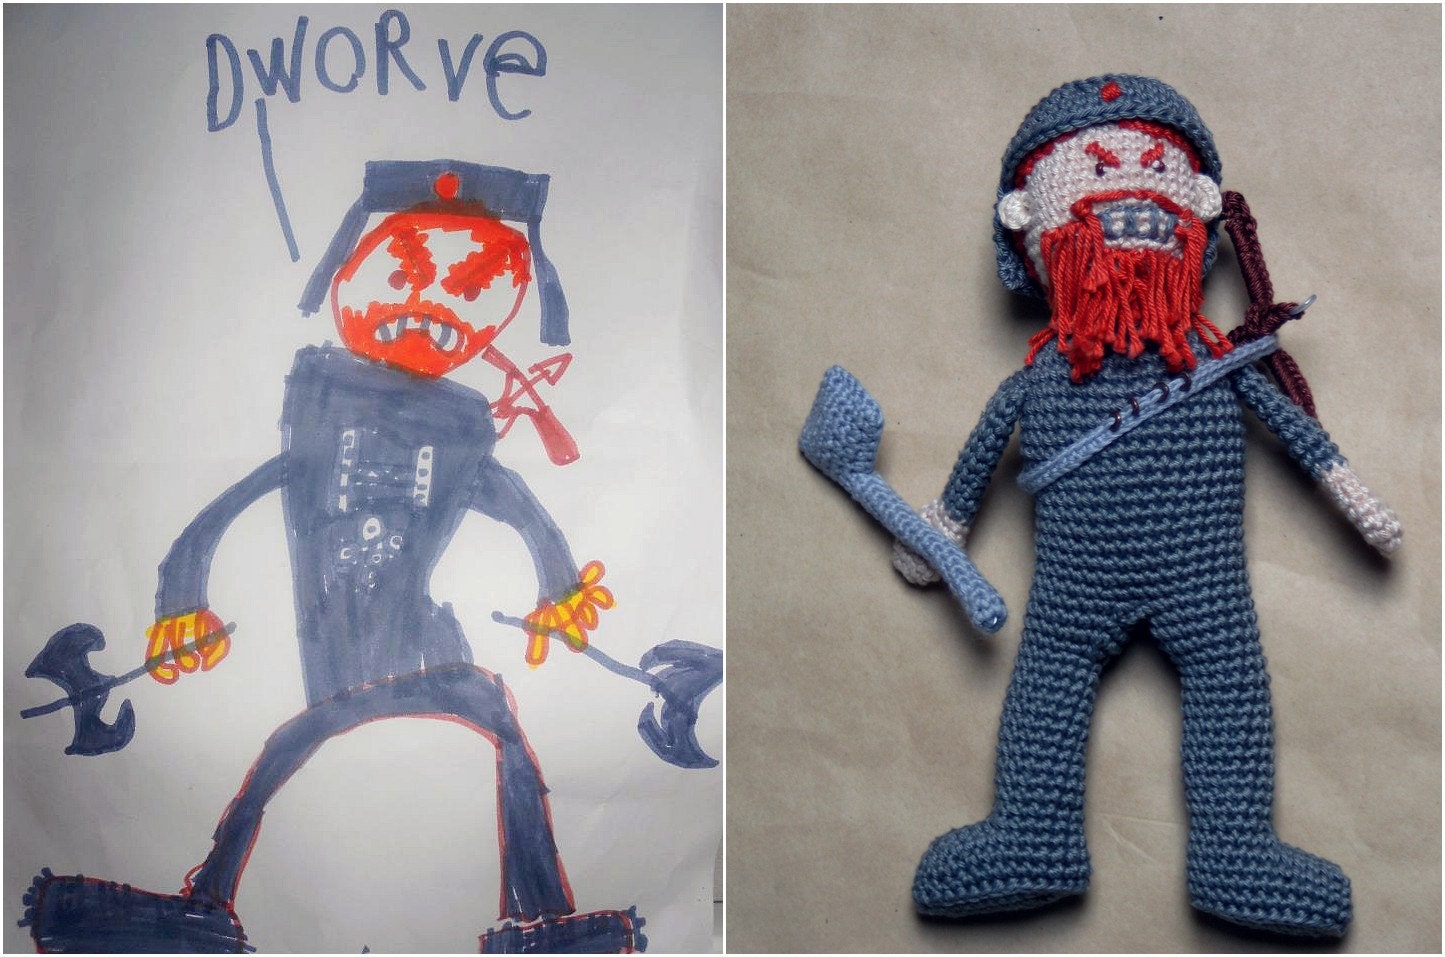 Creative toy from Your Kids drawing - Custom your own unique hero - Gift ideas: for kids&adults - YarnBallStories